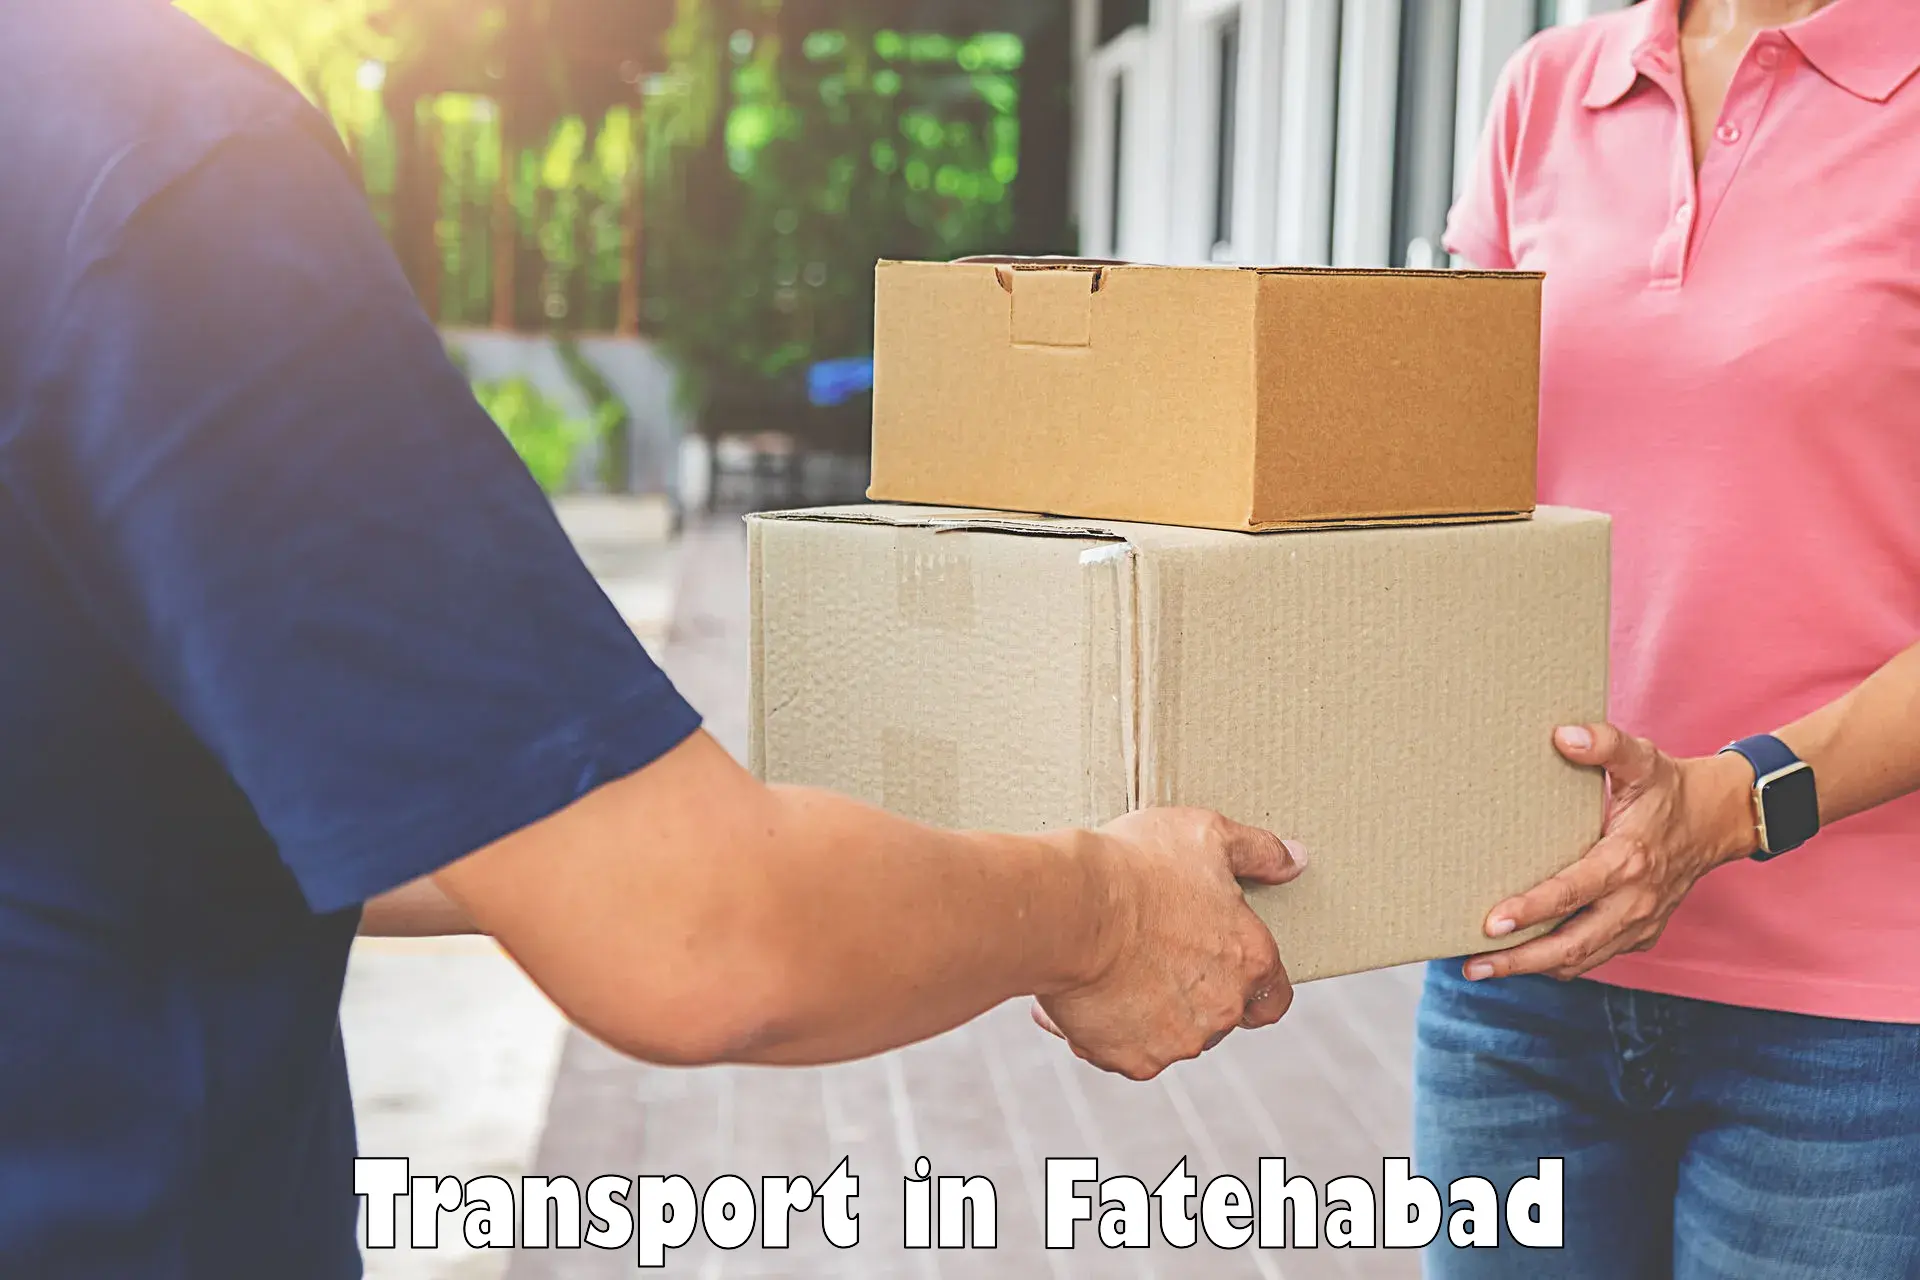 Two wheeler parcel service in Fatehabad